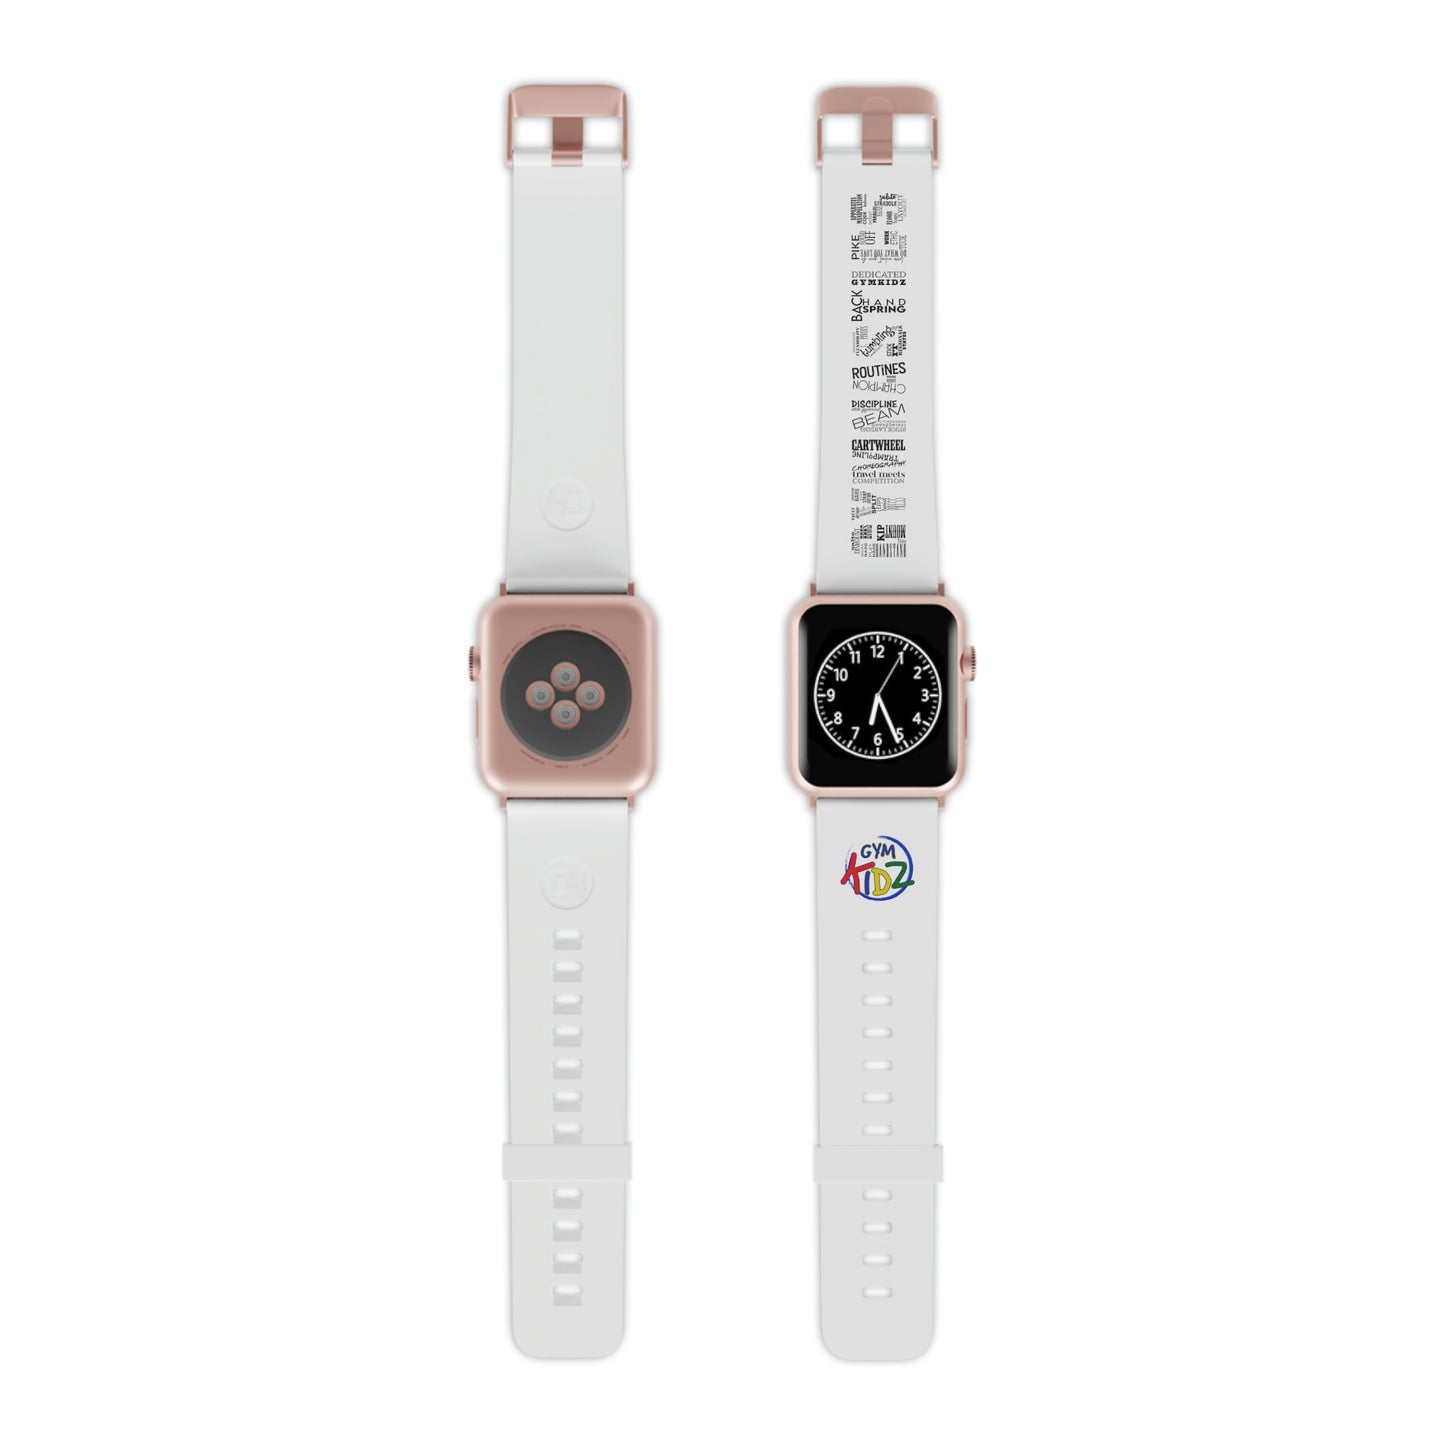 Gym Kidz Watch Band for Apple Watch (white band)